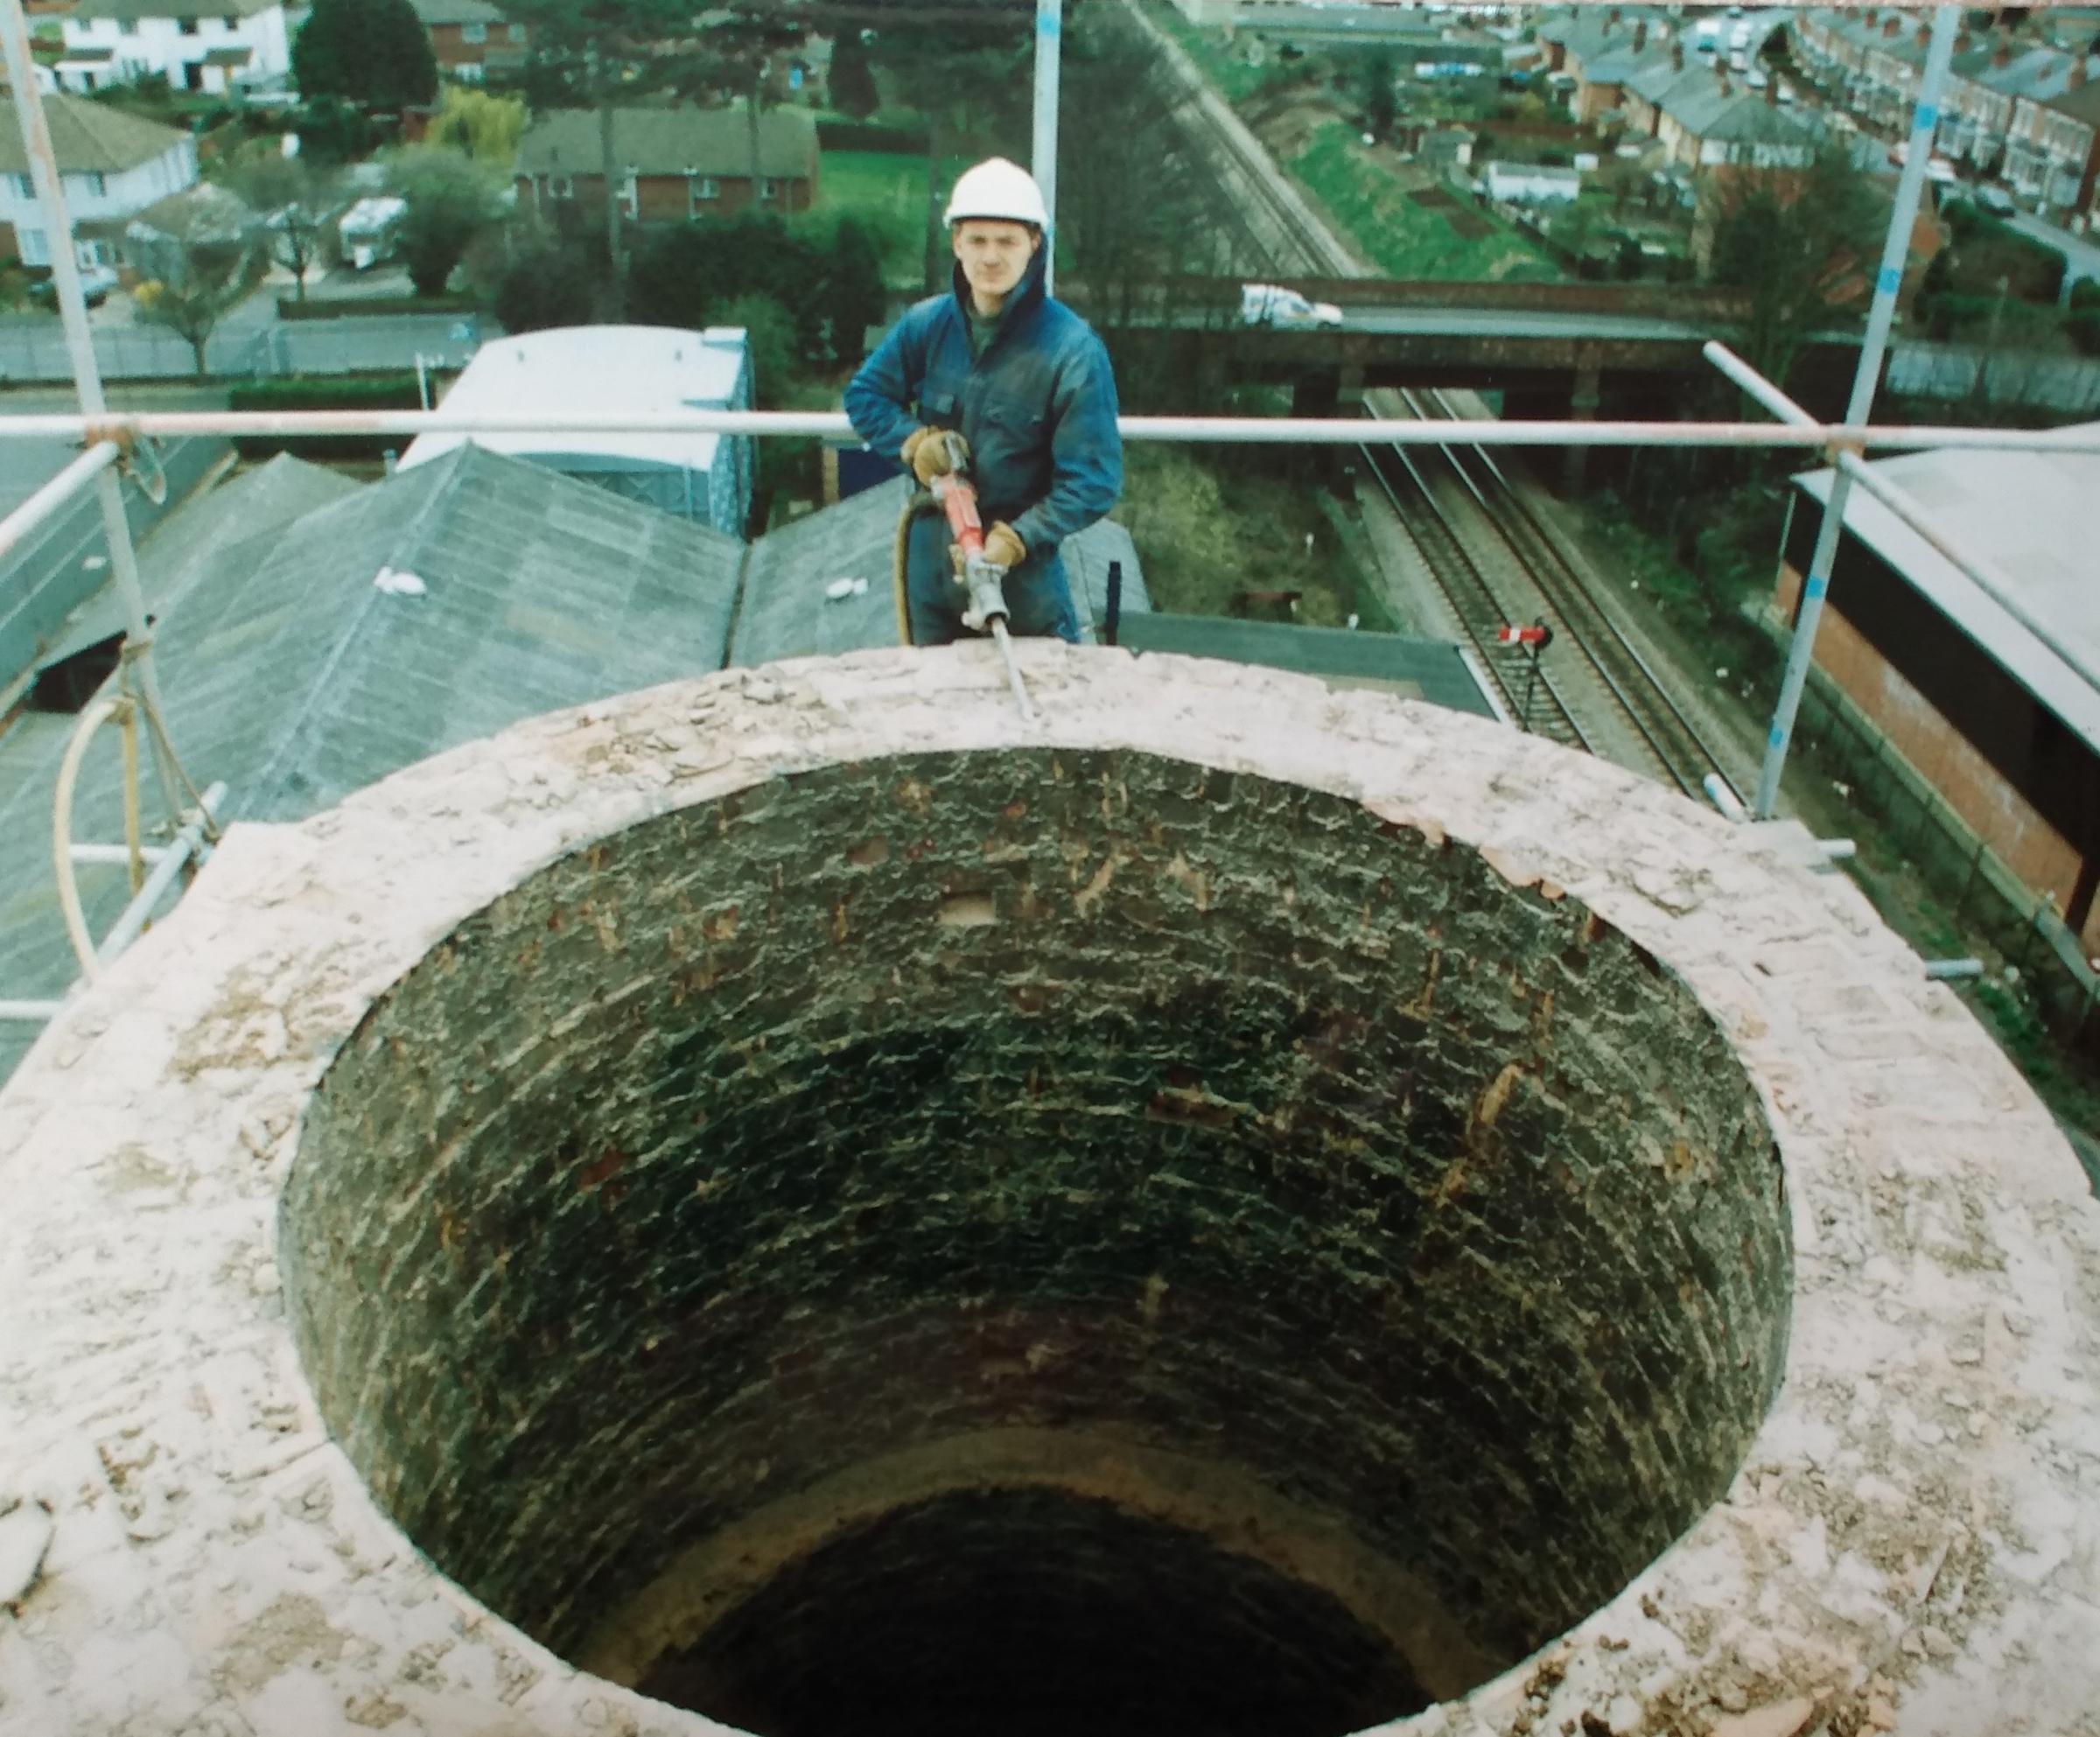 Mike Bent starts demolition work, brick by brick, on the chimney in March 1998 in a bid to improve the local environment